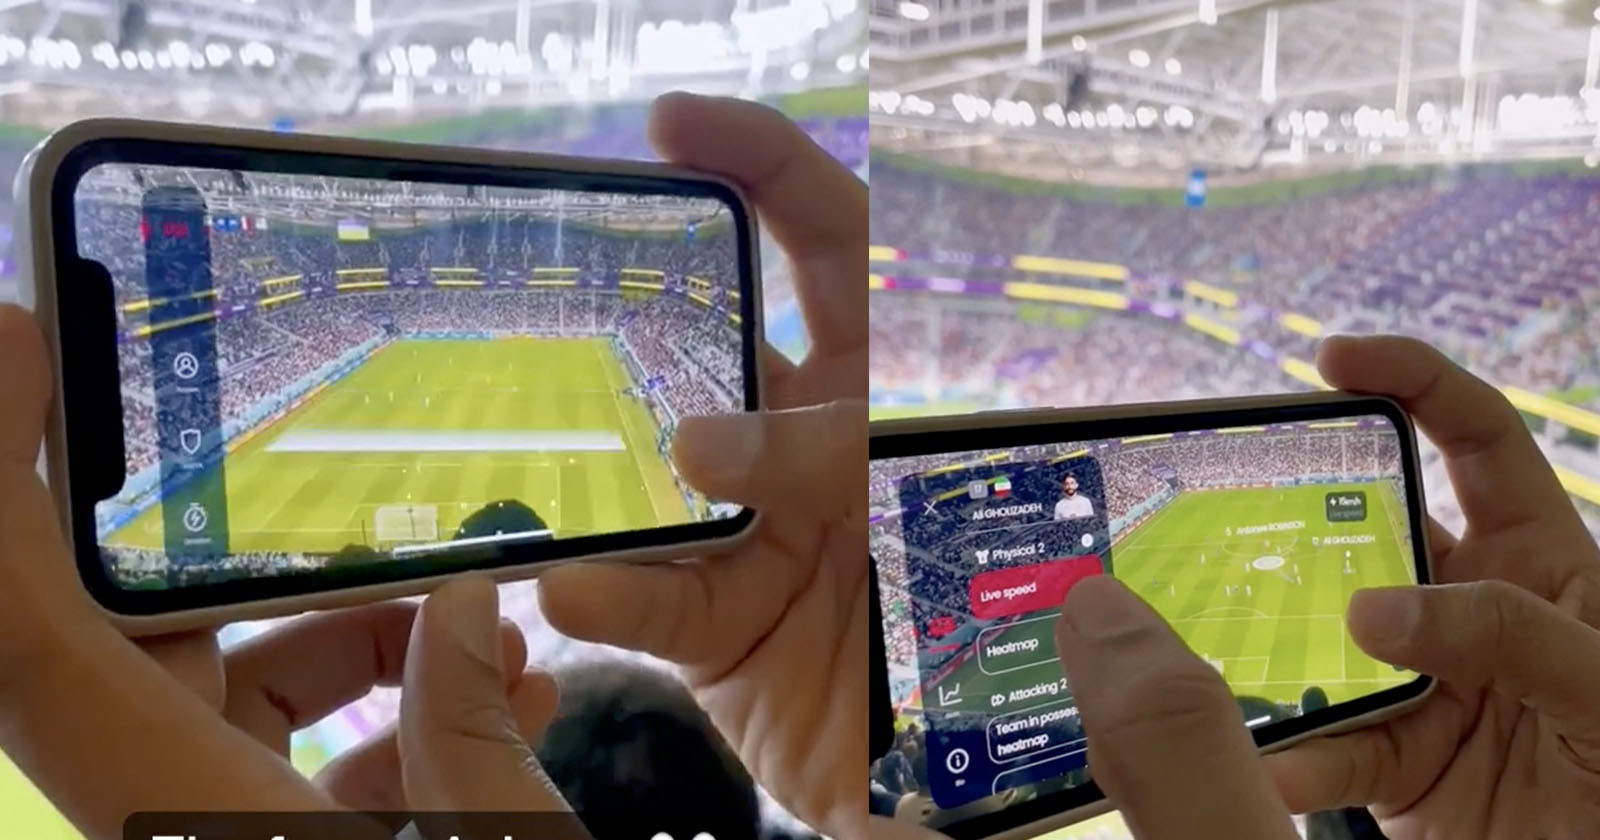 Fans at the World Cup Can Use AR App to Scan Pitch and Players in Real Time